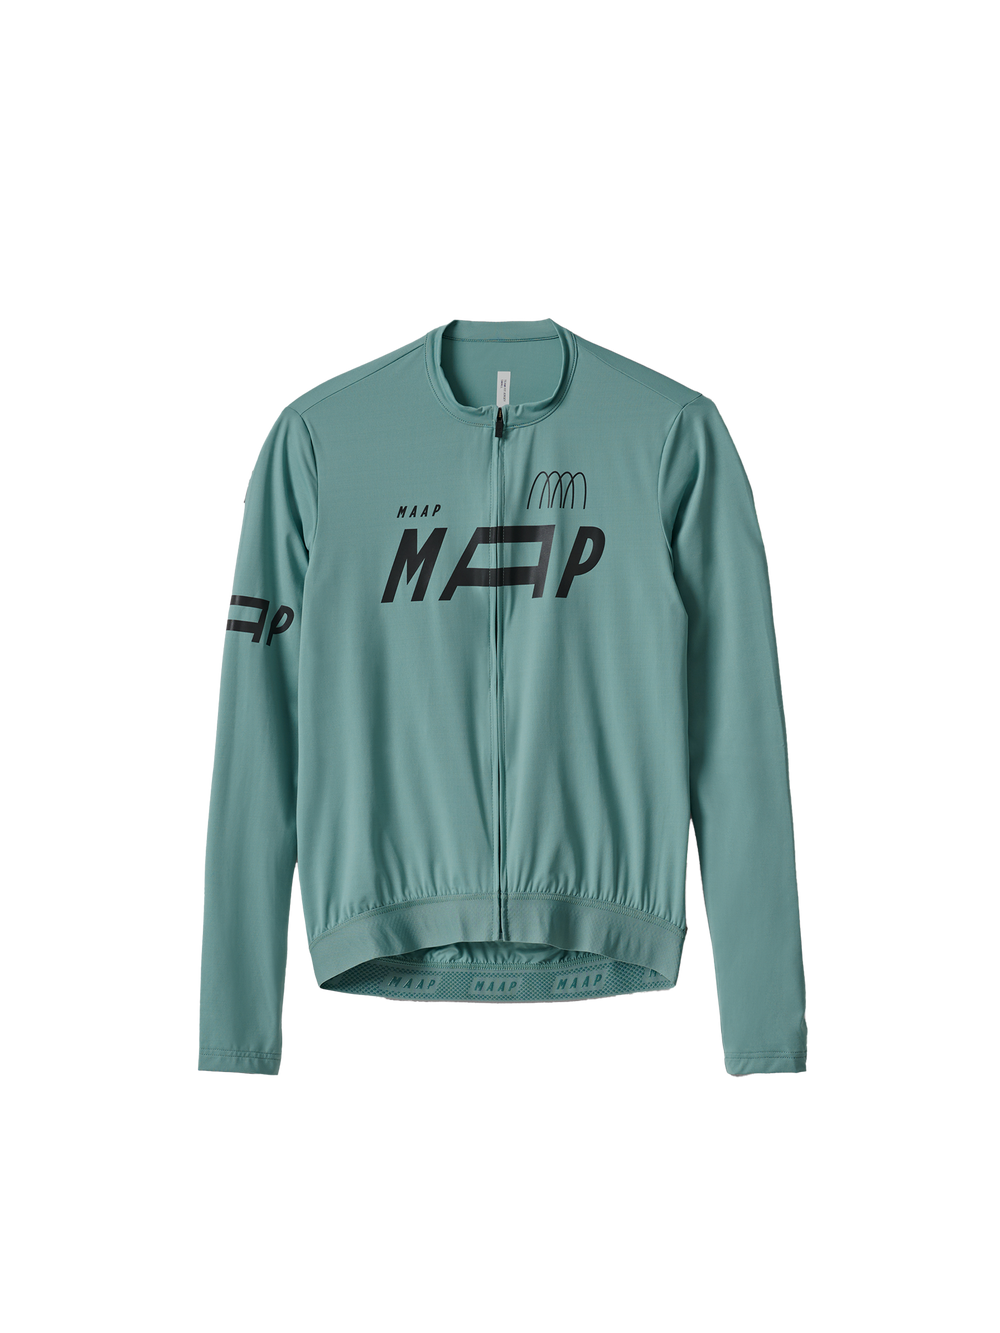 Product Image for Adapt LS Jersey